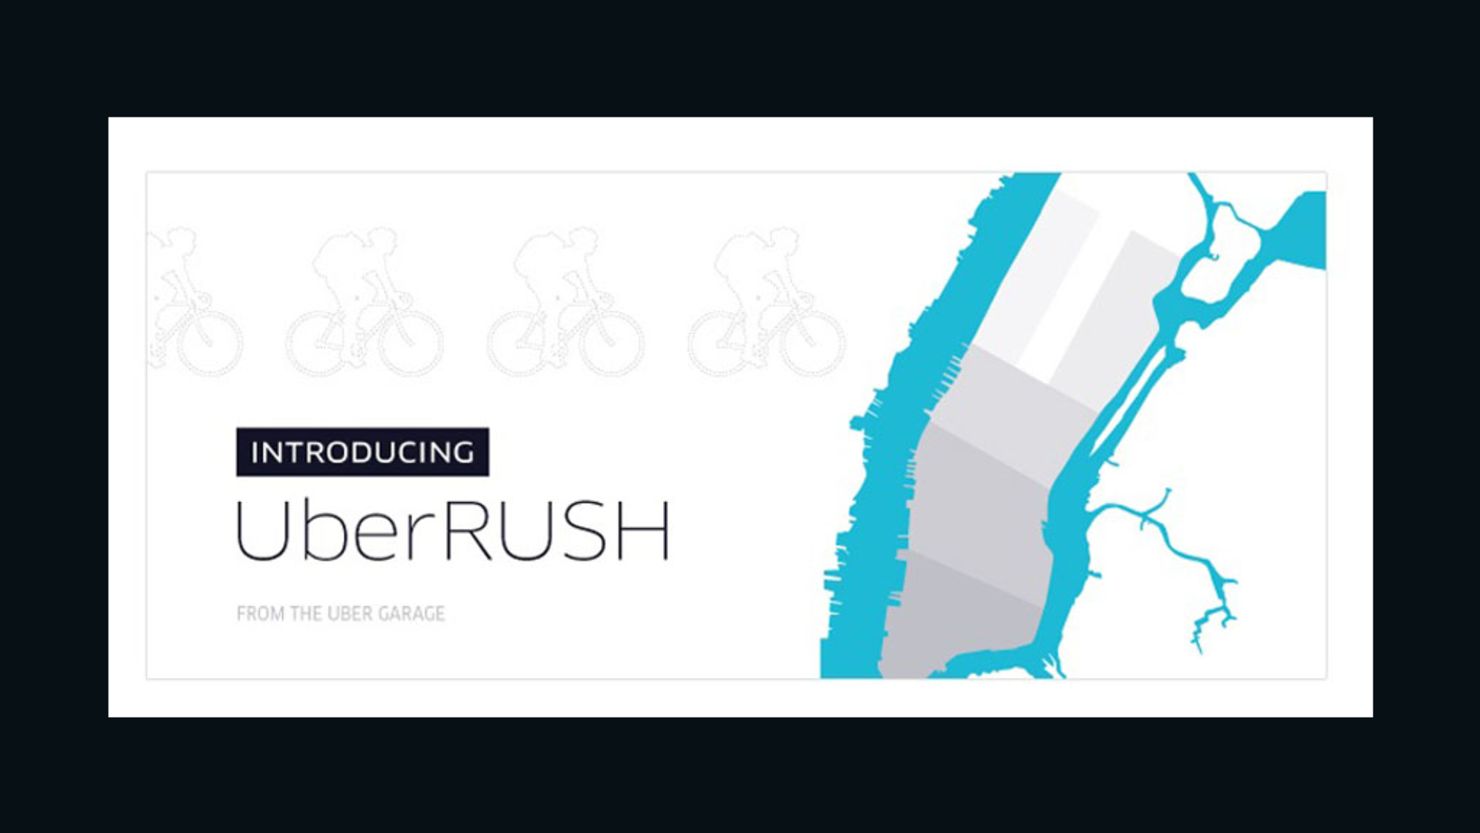 Uber Rush is a new service from the company that lets app users hook up with nearby drivers for a fee.